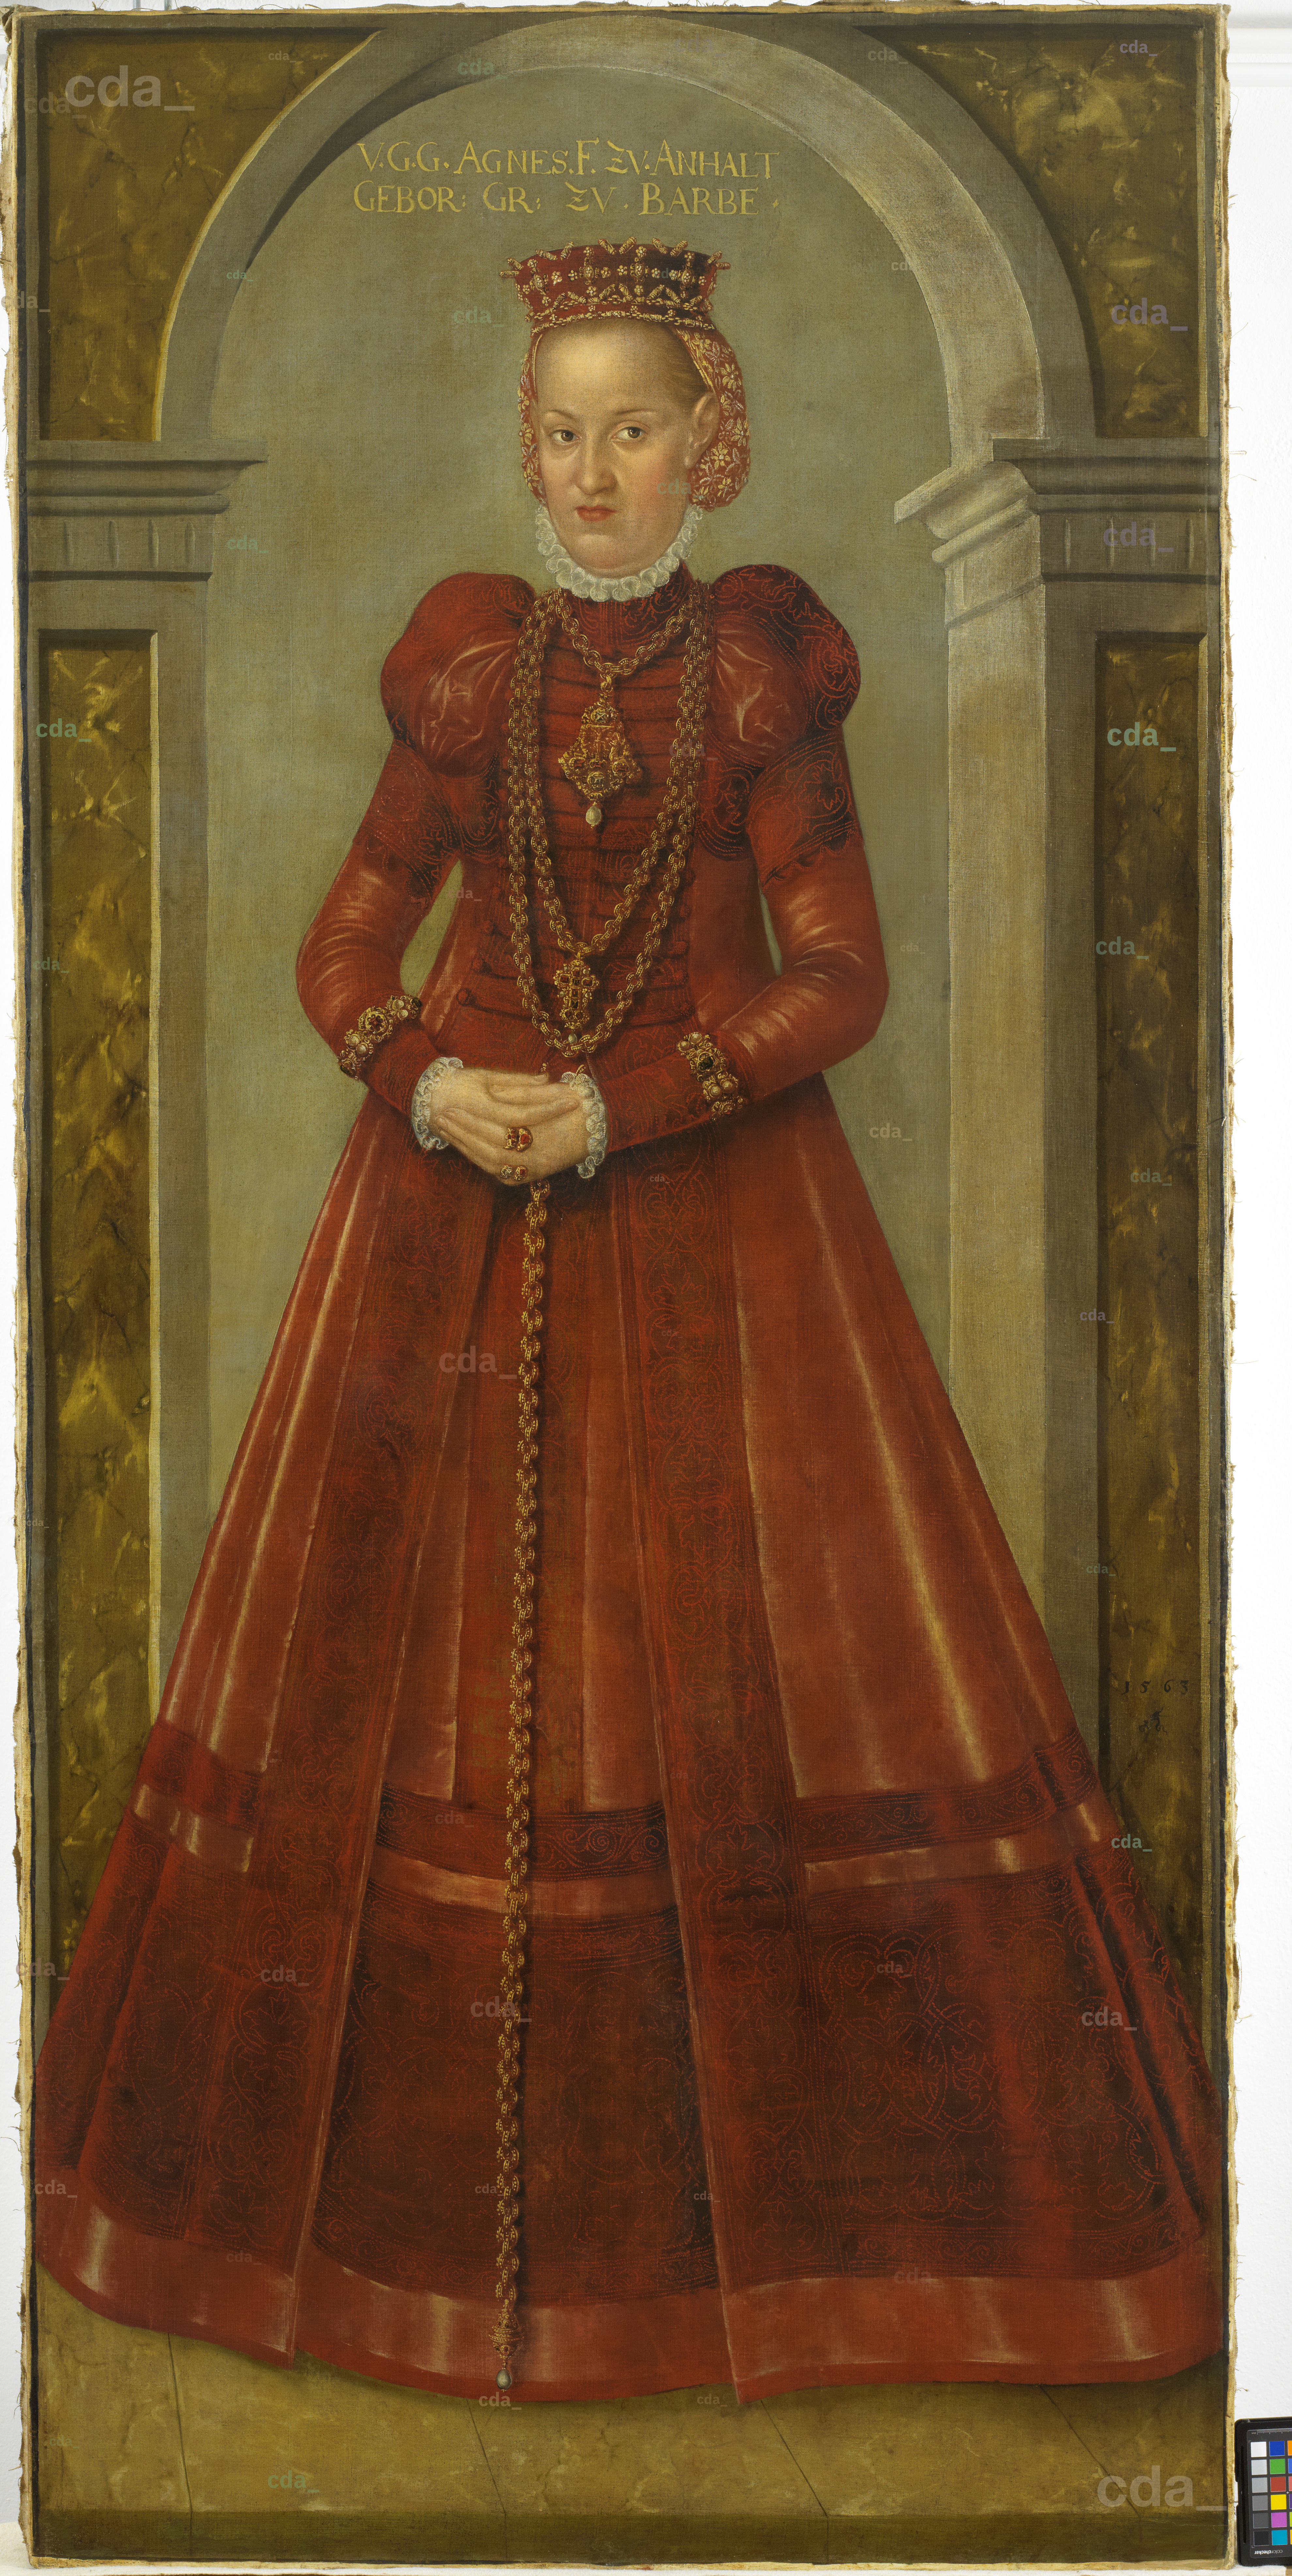 holdall Hare fest cda :: Paintings :: Portrait of Princess Agnes of Anhalt, née of Barby